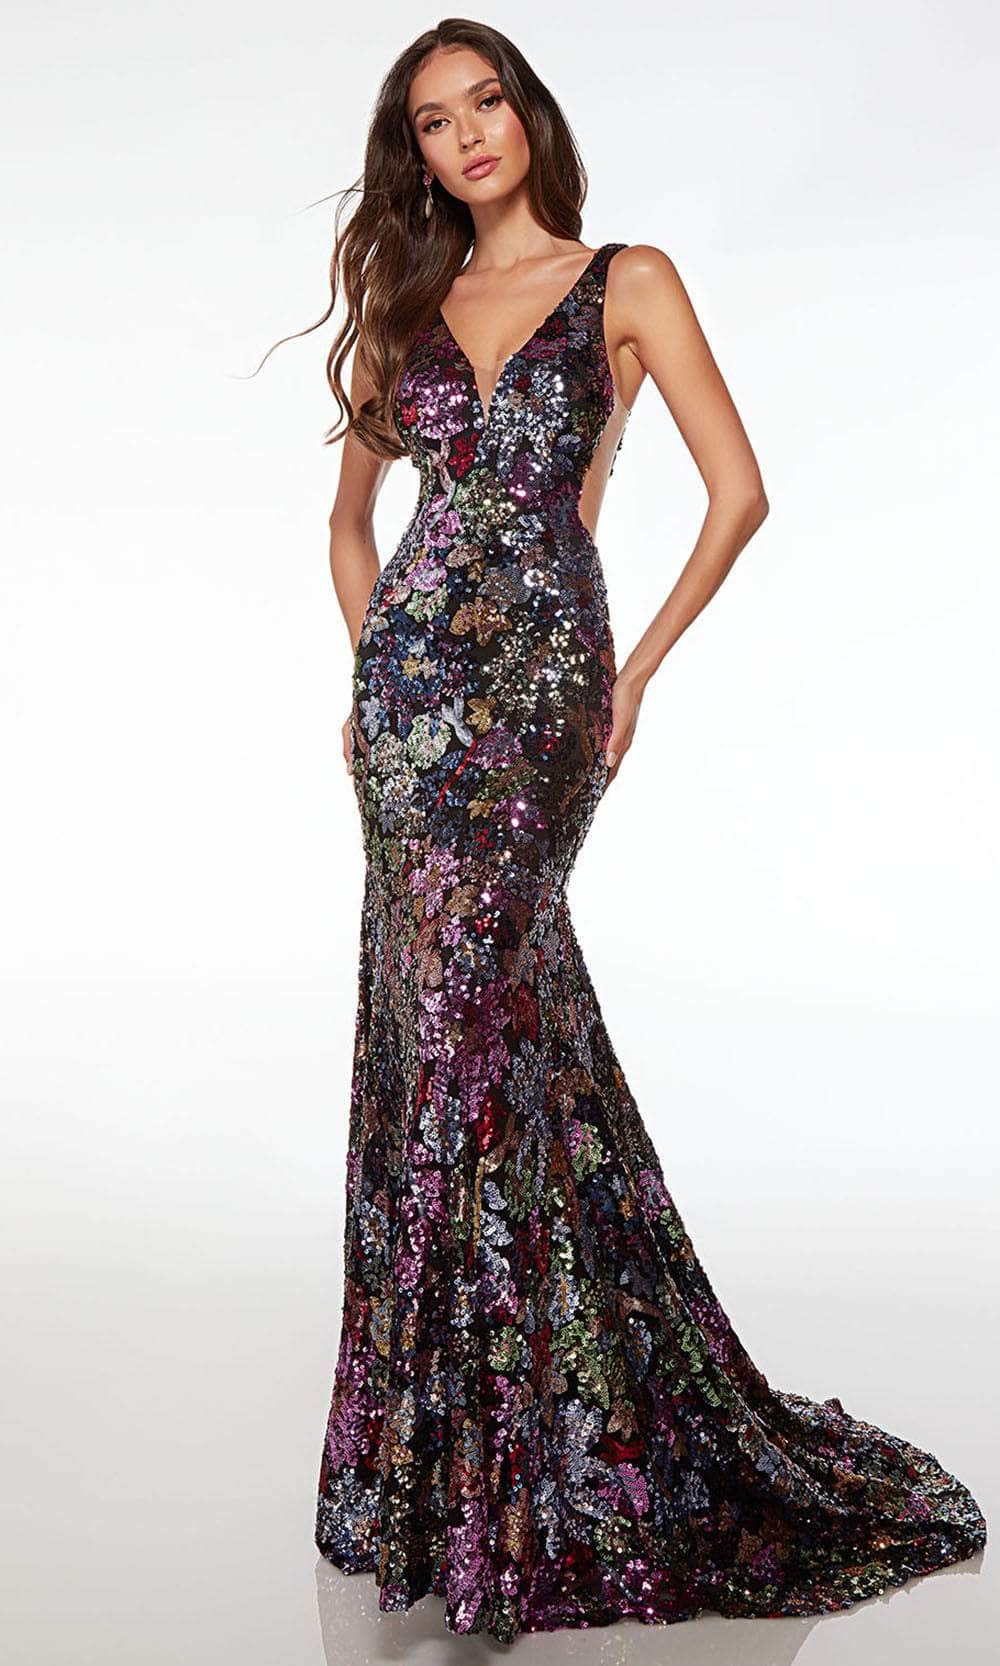 Image of Alyce Paris 61667 - Floral Sequin Sleeveless Prom Dress